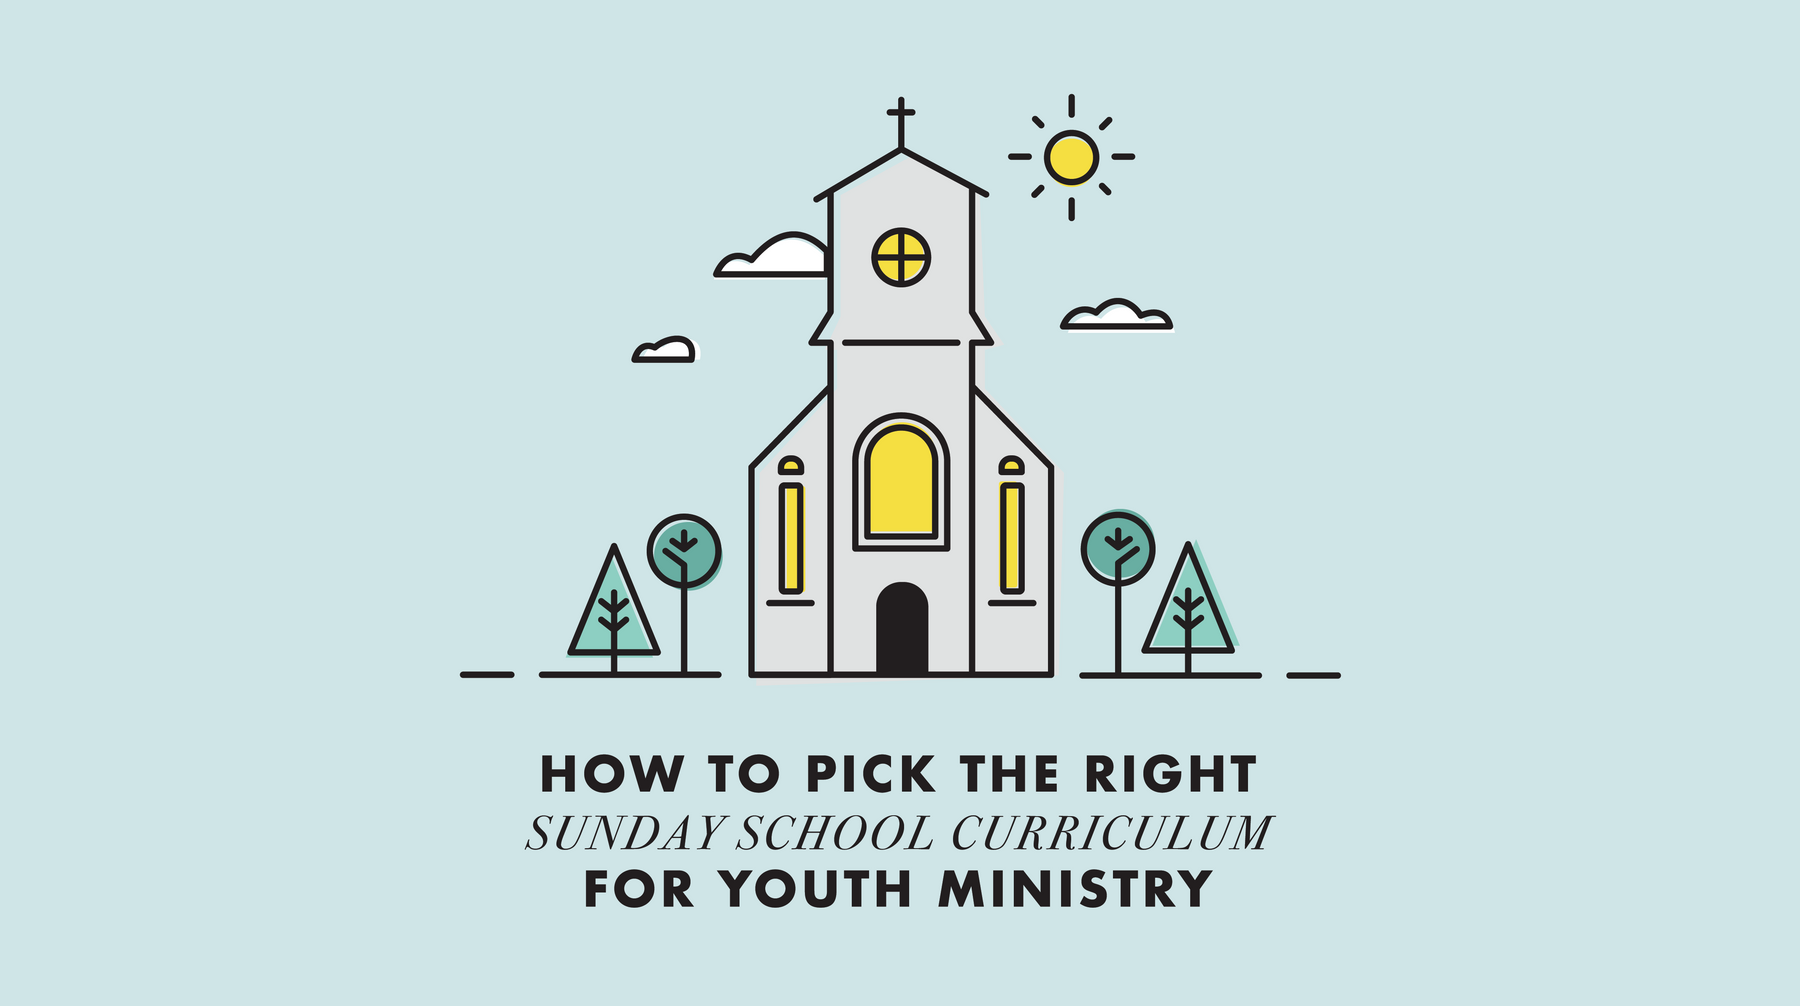 How to Pick the Right Sunday School Curriculum for Youth Ministry